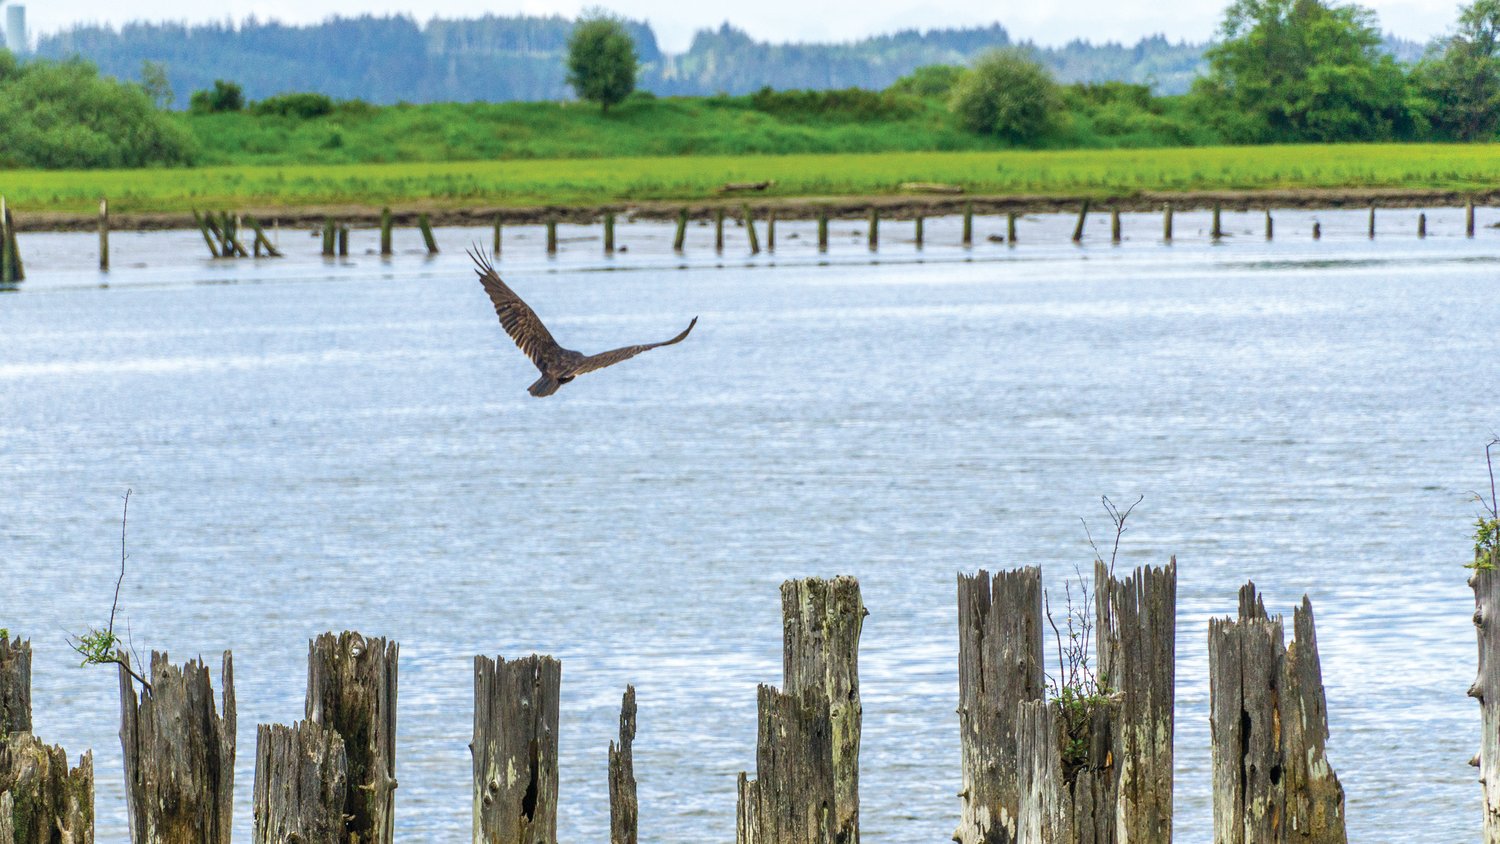 A vulture flies off from a post at the 28th Street Boat Launch in Hoquiam.